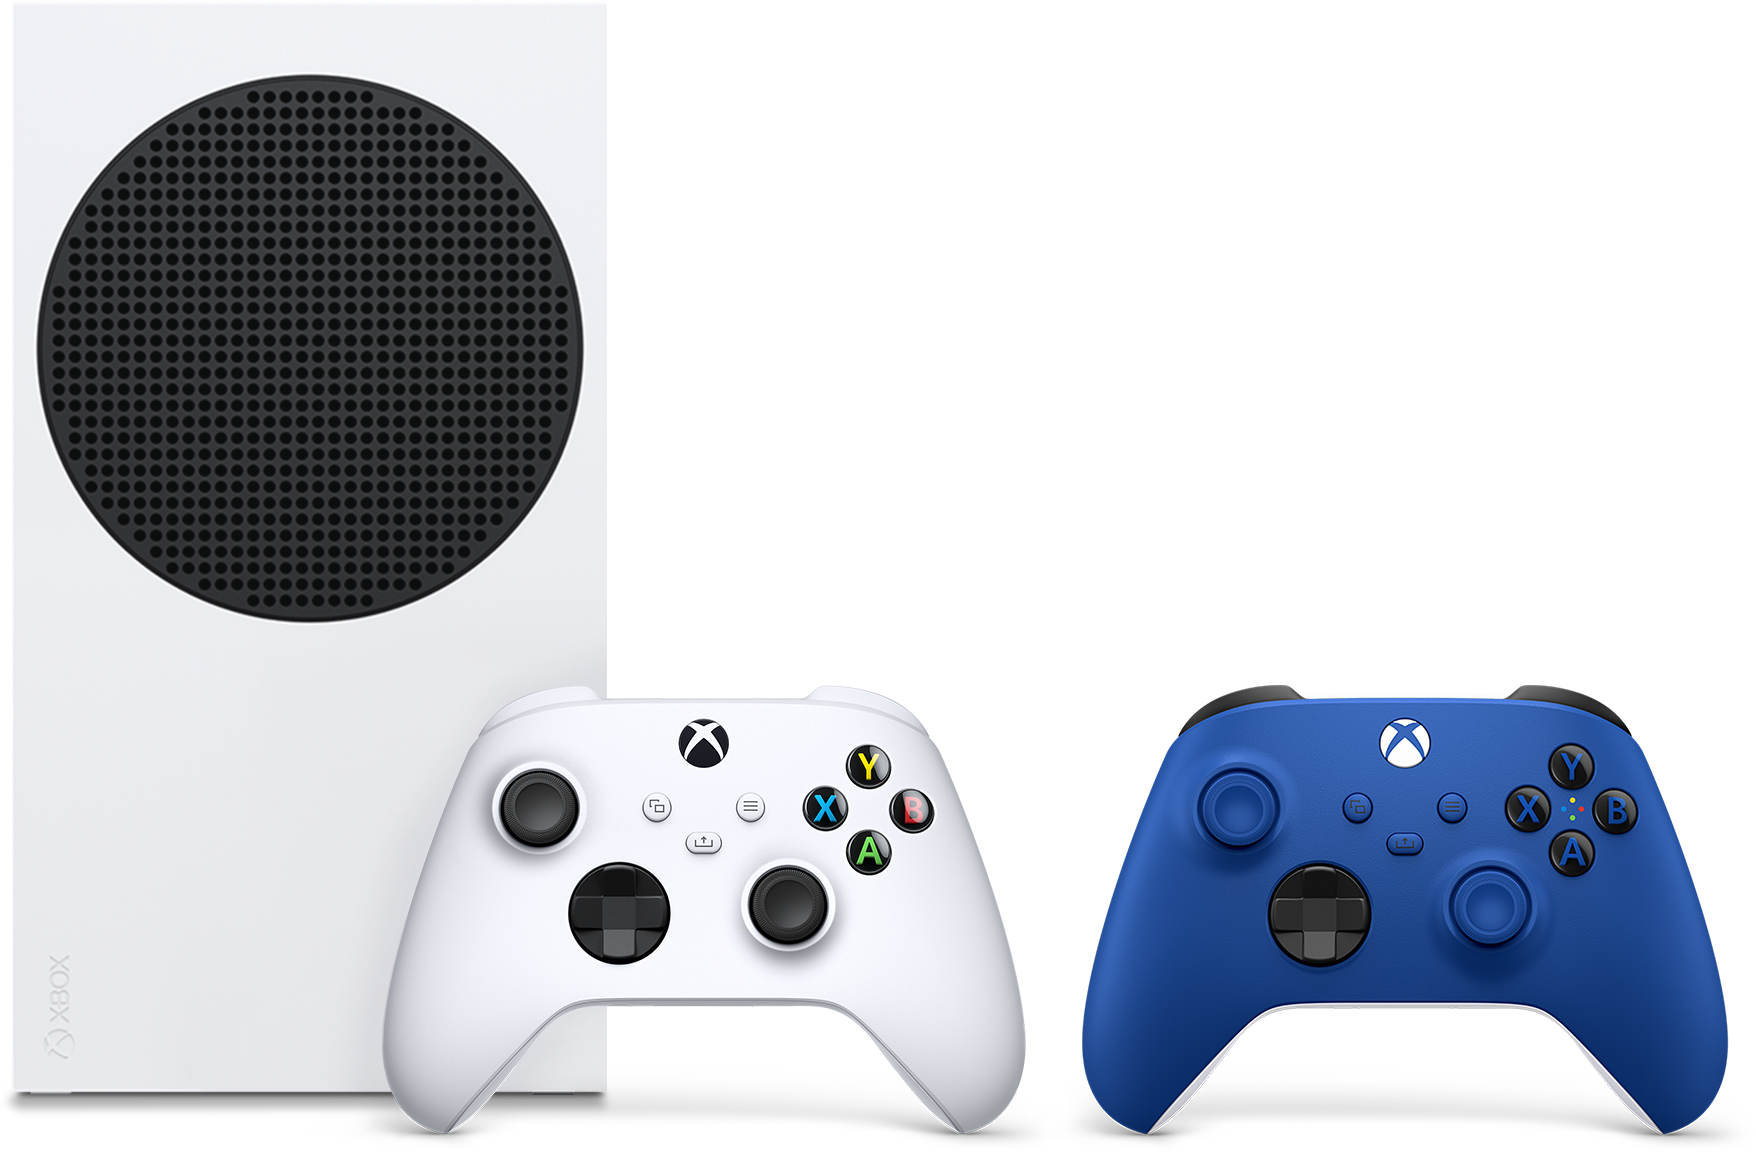 Xbox Series S and controller (Blue)